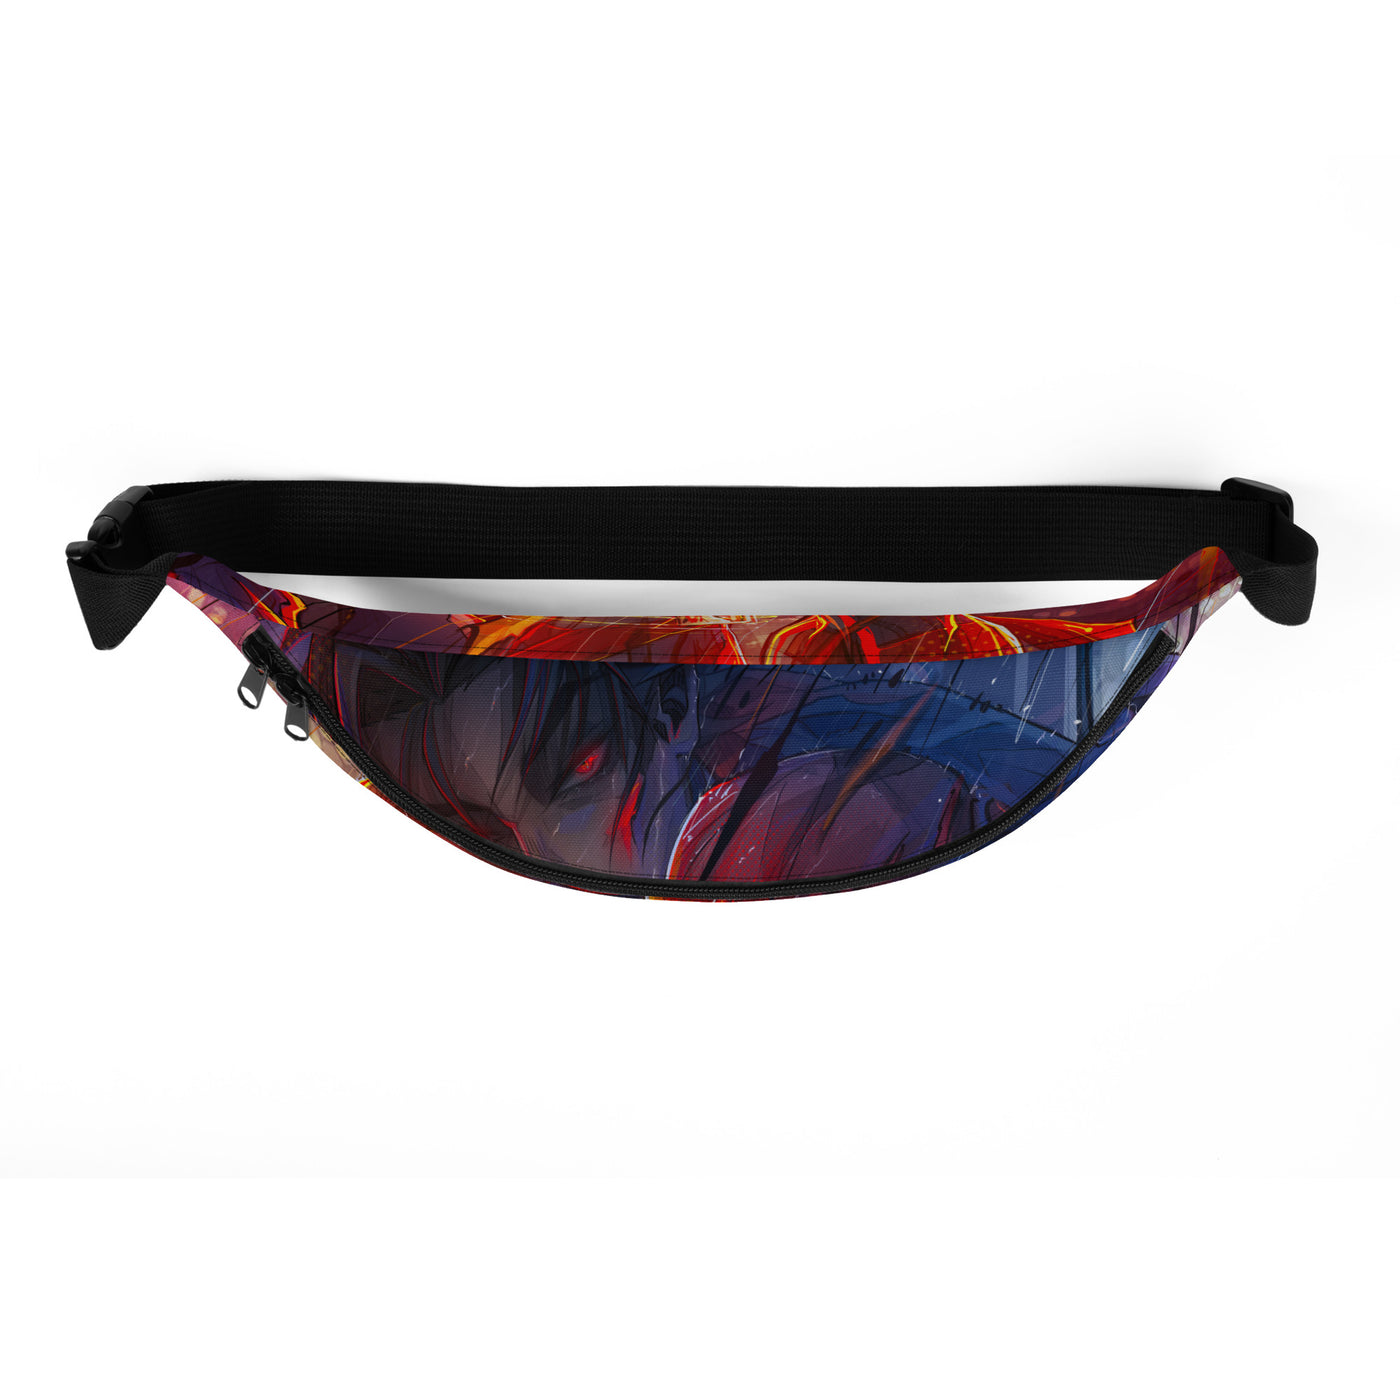 Spiderman 2099 Fanny Pack